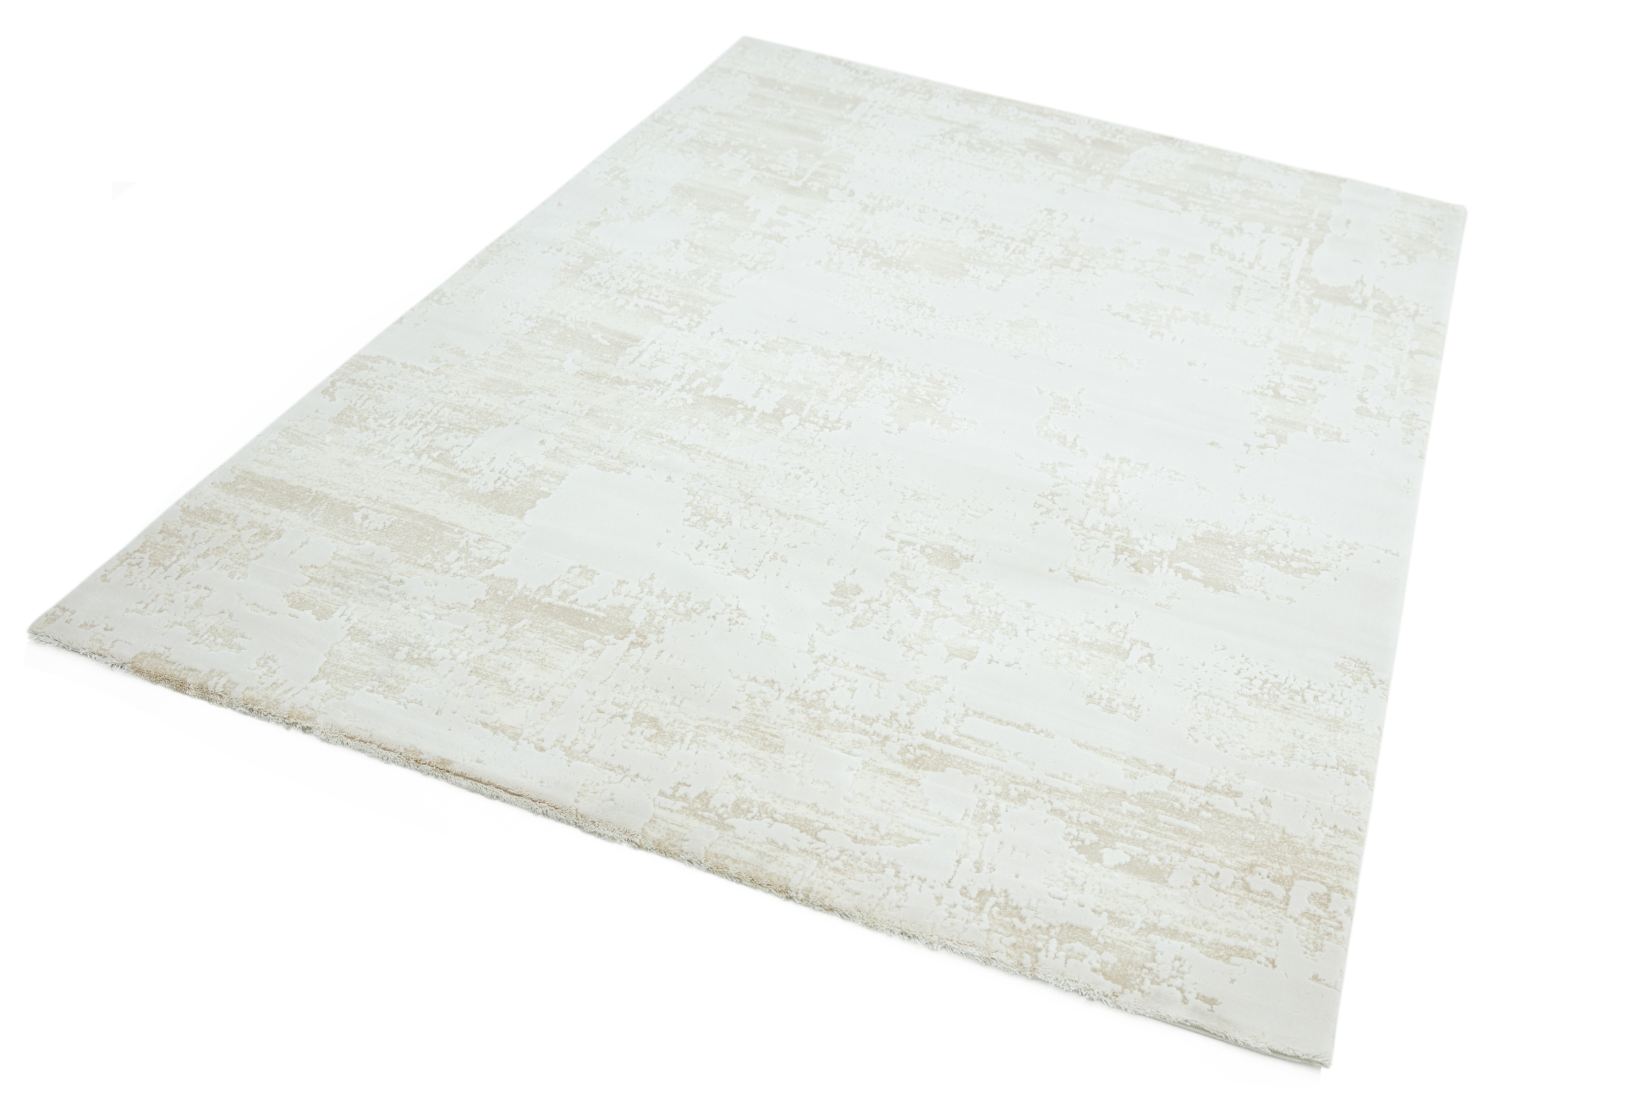 Astral Super Soft Acrylic Rug - Ivory AS12